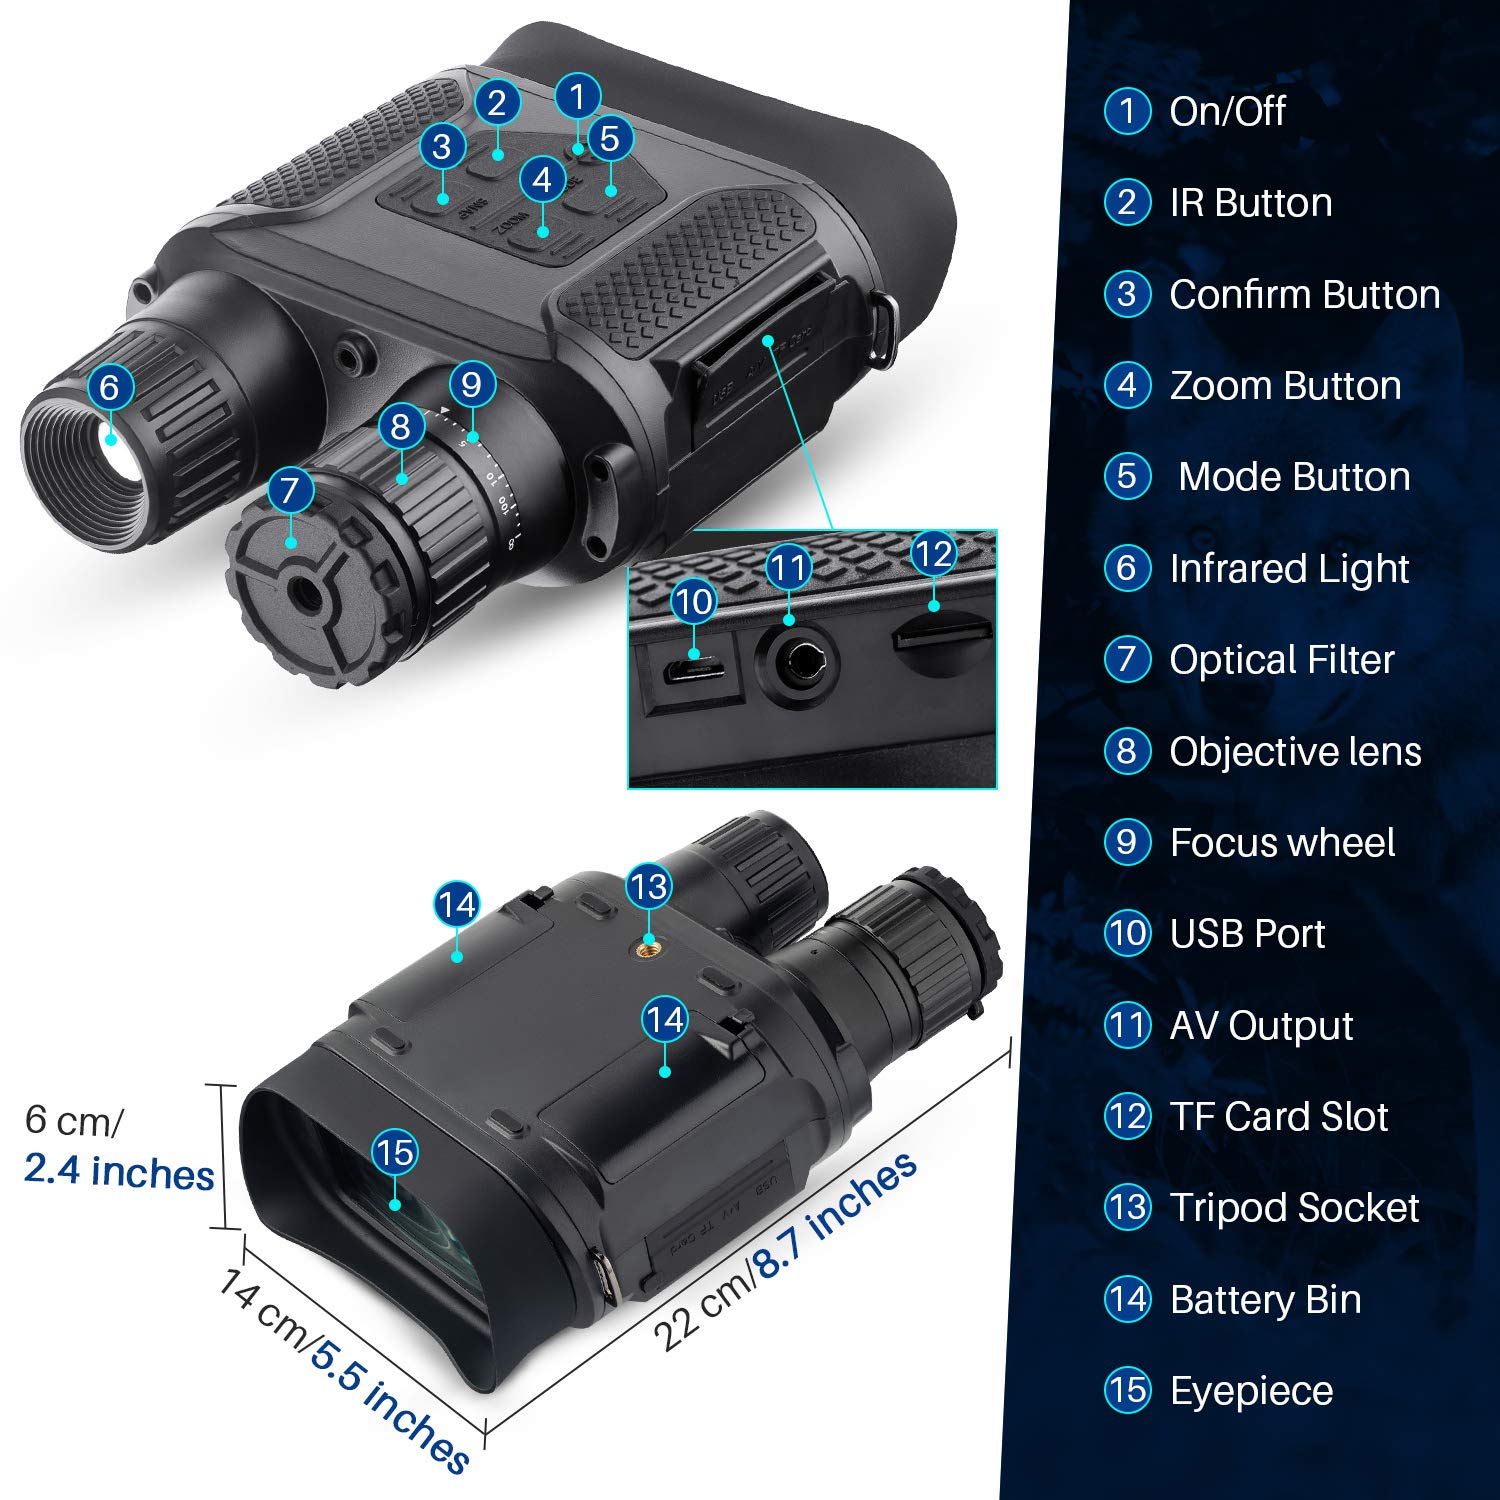 Digital Night Vision Binoculars for Complete Darkness with 7X Digital Zoom 32 GB Memory Card for Photo and Video Storage- Infrared Night Vision Goggles for Adults Night Hunting, Surveillance